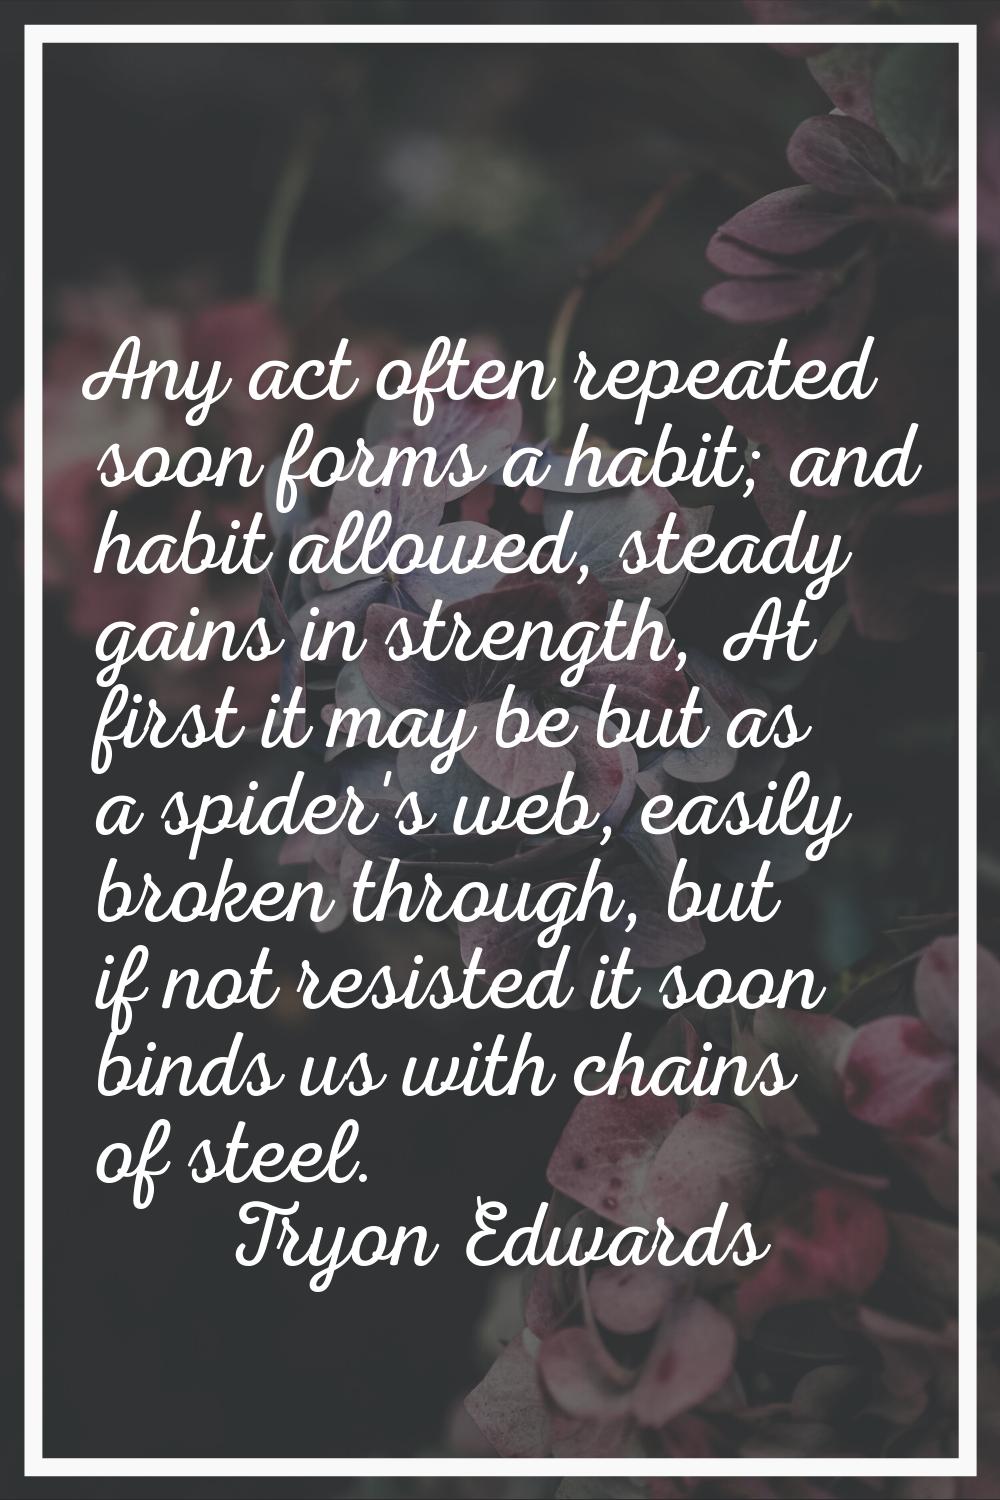 Any act often repeated soon forms a habit; and habit allowed, steady gains in strength, At first it